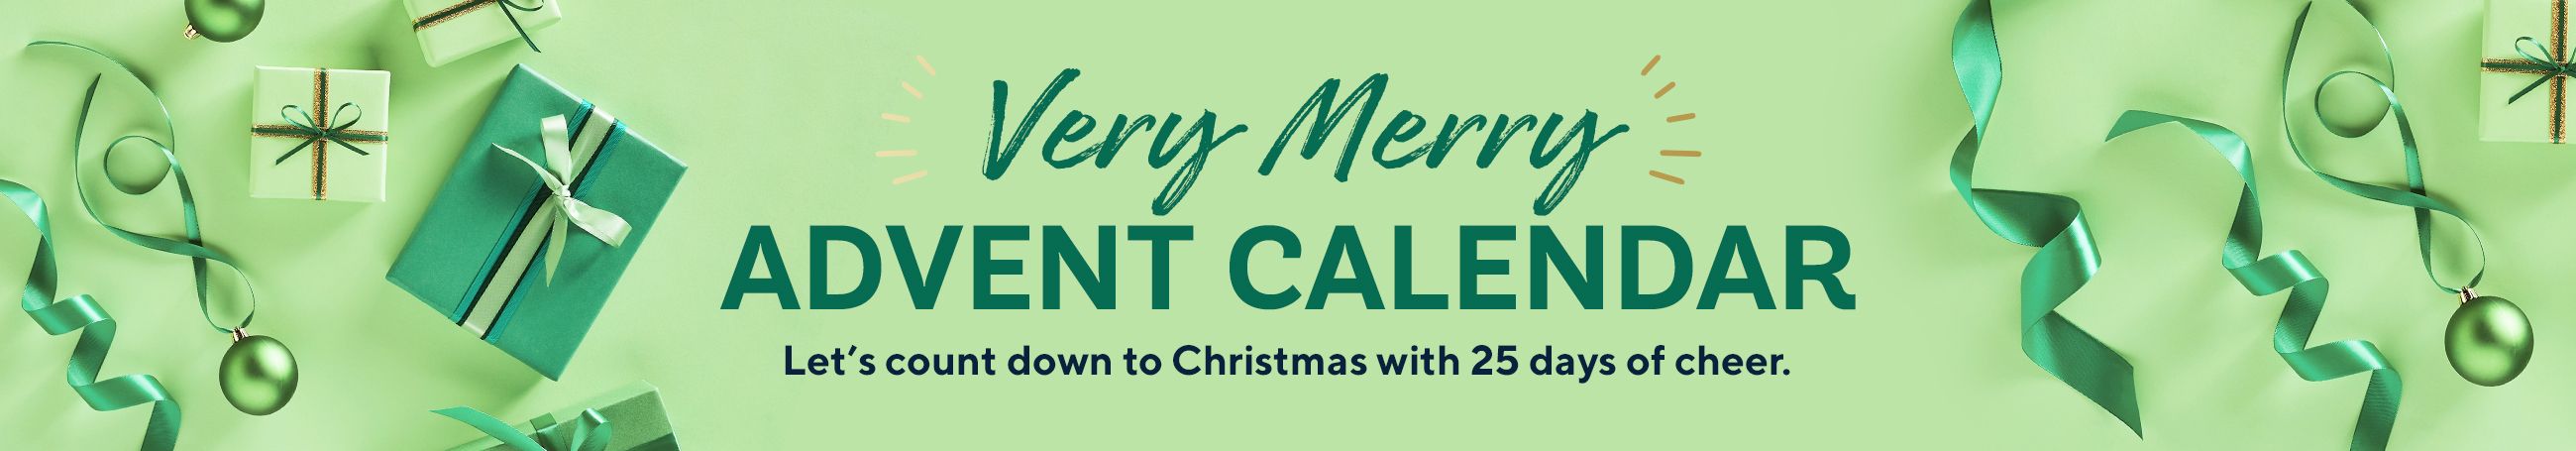 Very Merry Advent Calendar. Let's count down to Christmas with 25 days of cheer.